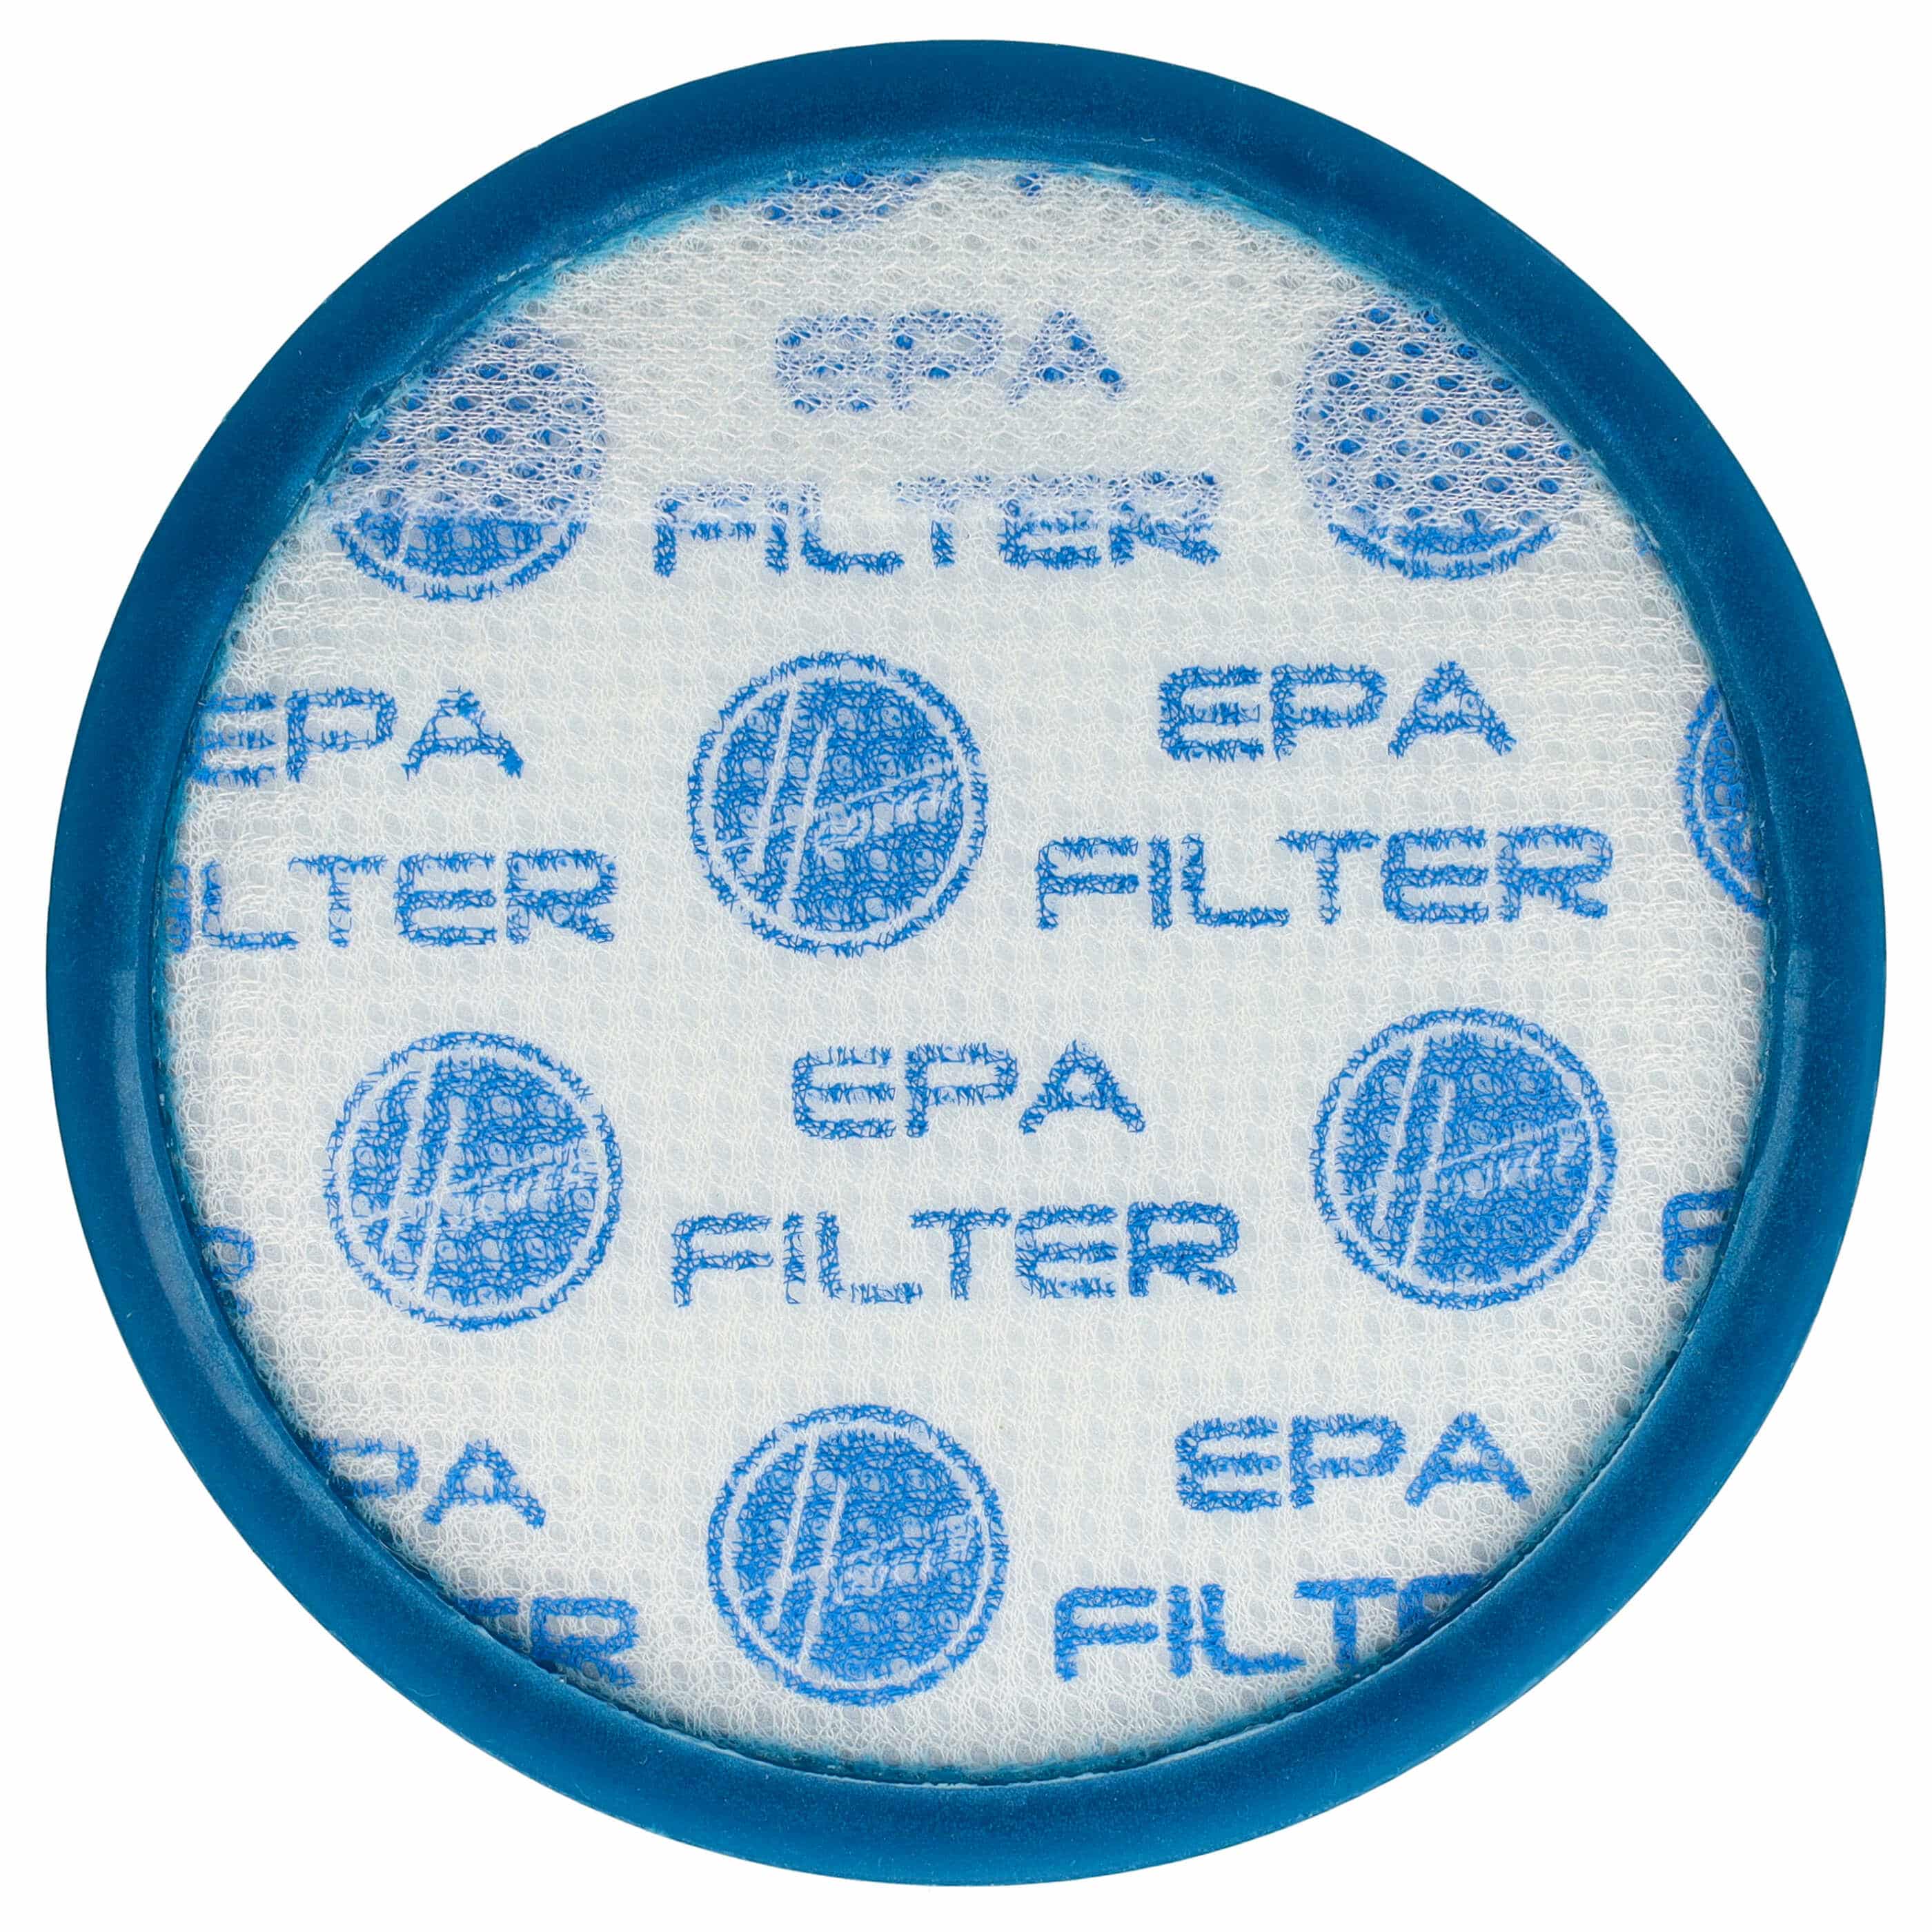 1x HEPA pre-motor filter replaces Hoover S115, 35601325 for Hoover Vacuum Cleaner